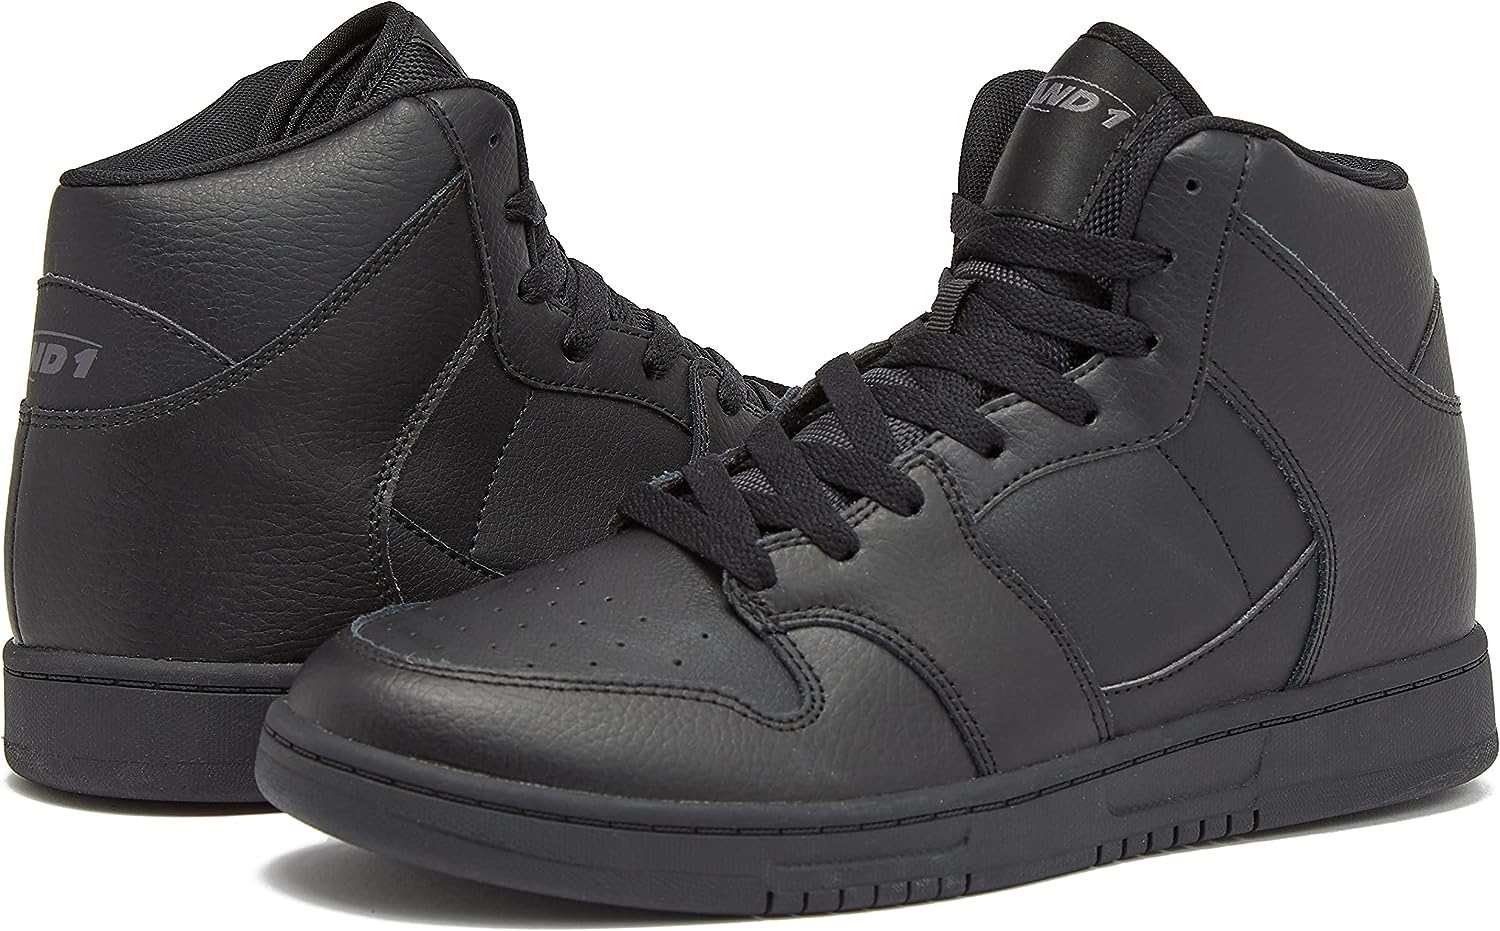 AND1 Slam Men’s Basketball Shoes, Mid Top Casual Court [...]